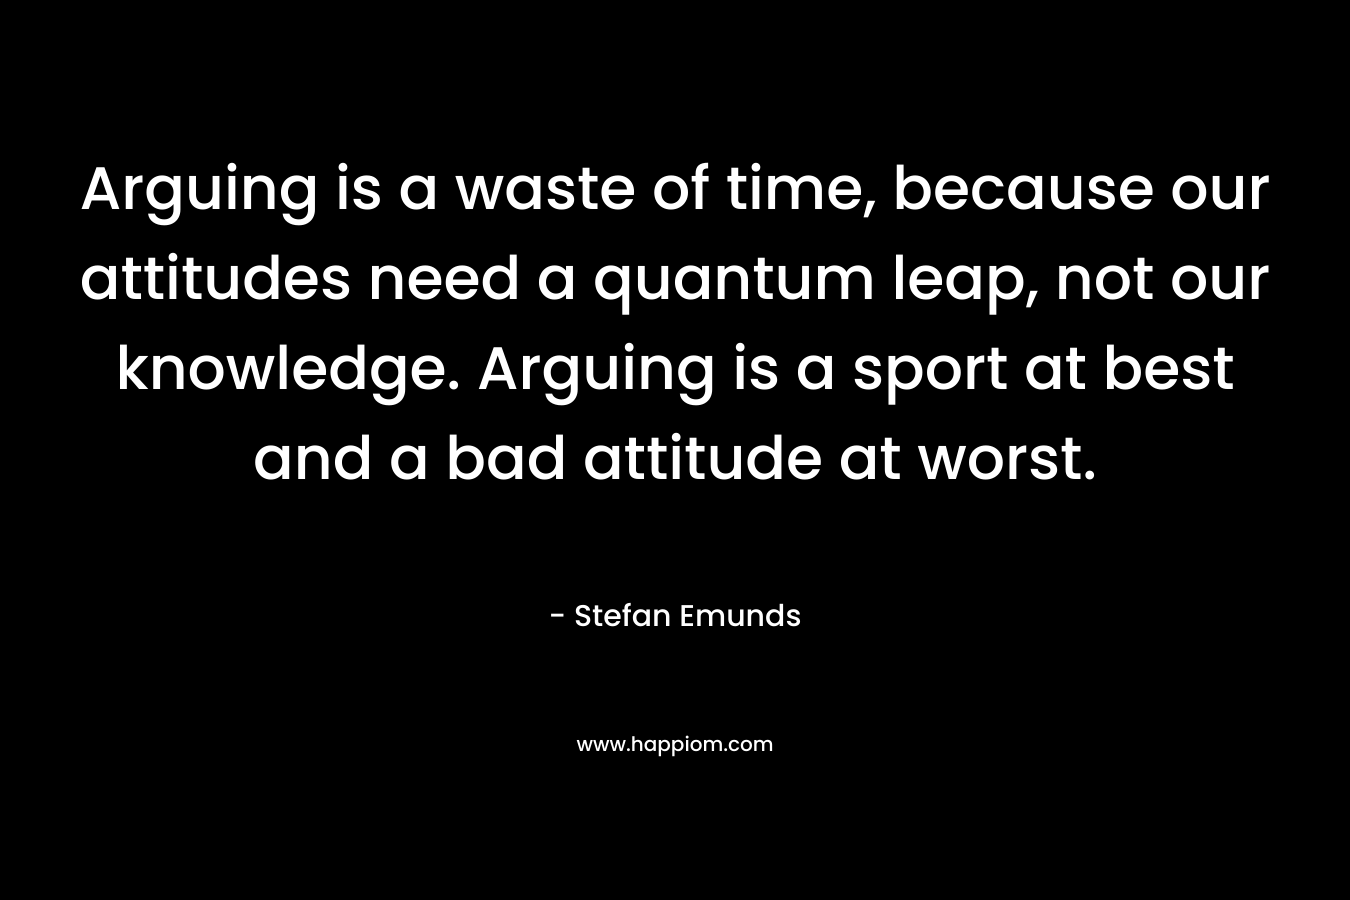 Arguing is a waste of time, because our attitudes need a quantum leap, not our knowledge. Arguing is a sport at best and a bad attitude at worst. – Stefan Emunds